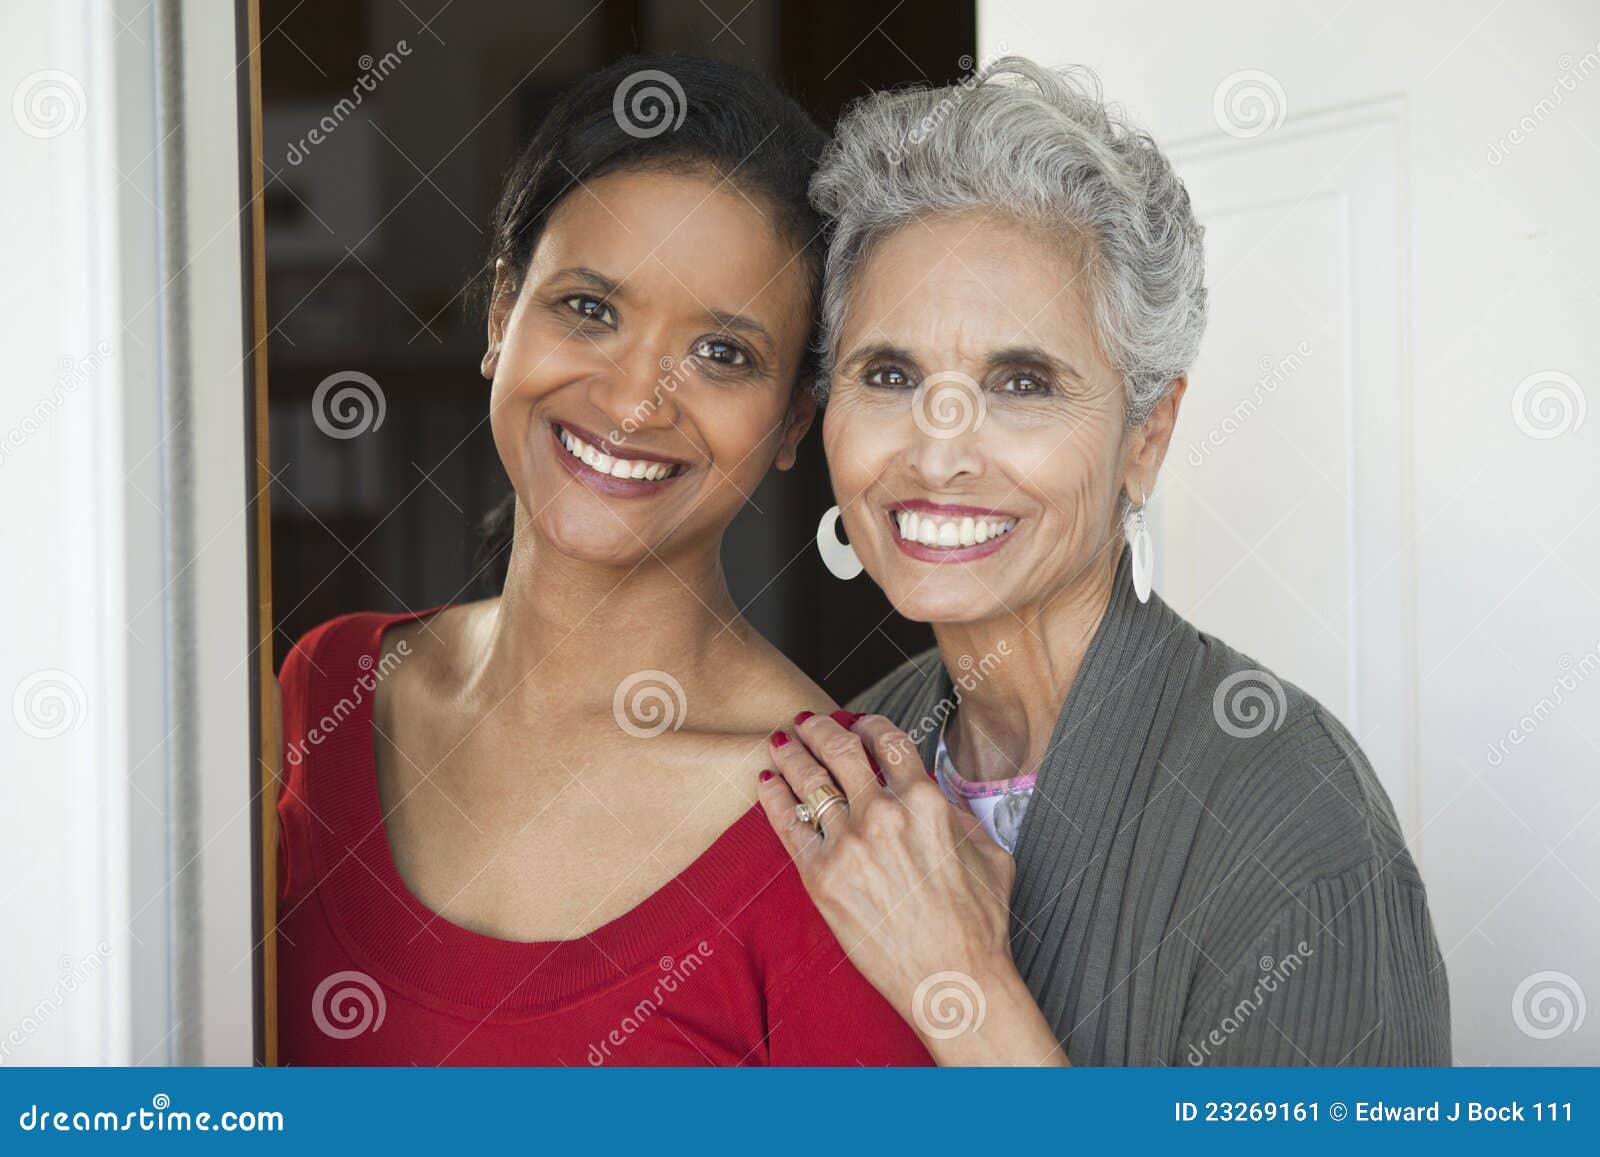 mother and daughter at the front door